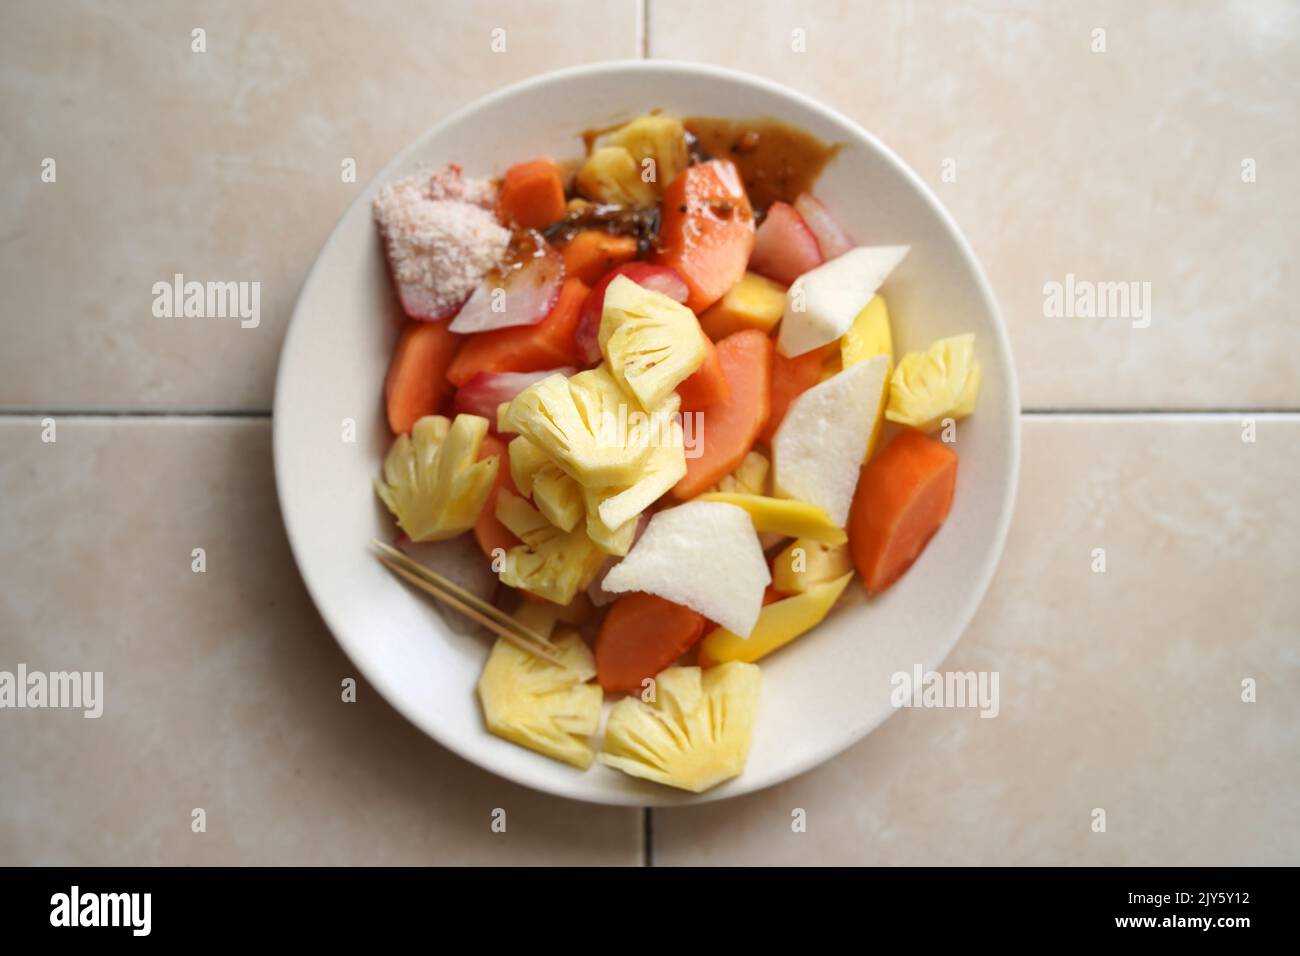 Rujak buah or indonesian fruit salad on white plate, served with spicy brown sugar sauce and ground peanuts. Stock Photo